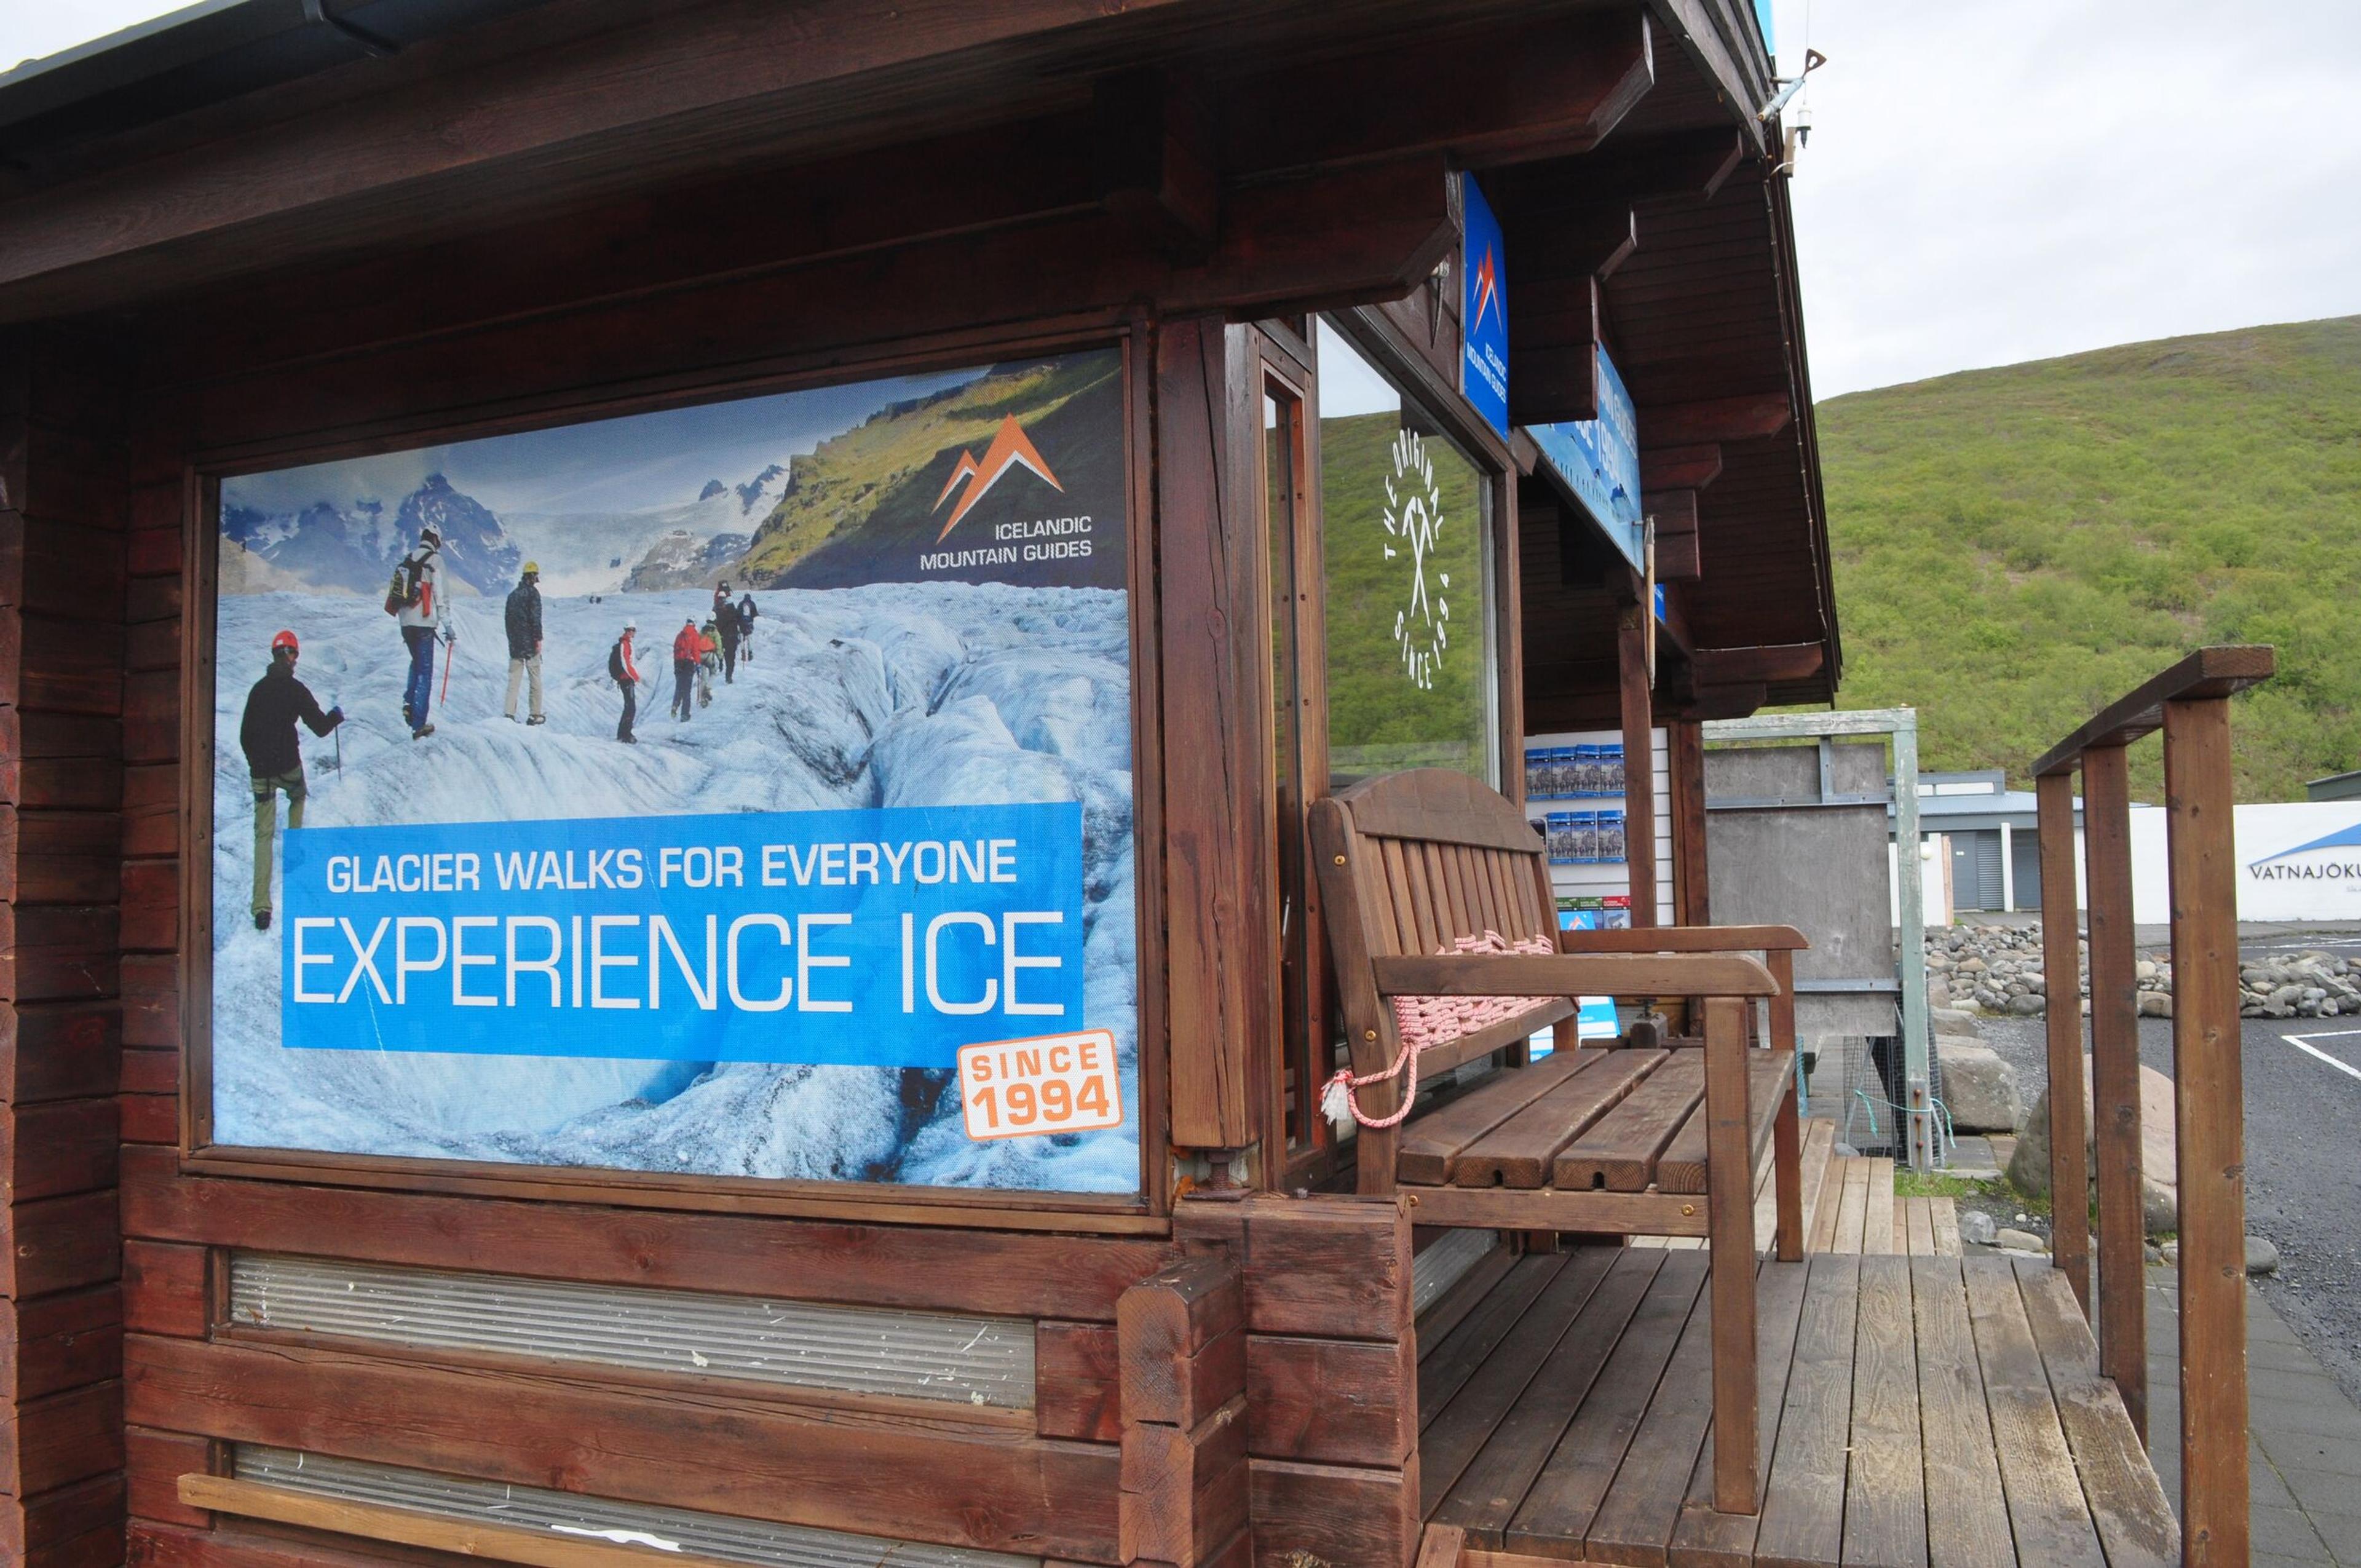 Wooden structure displaying a poster promoting glacier hiking adventures.